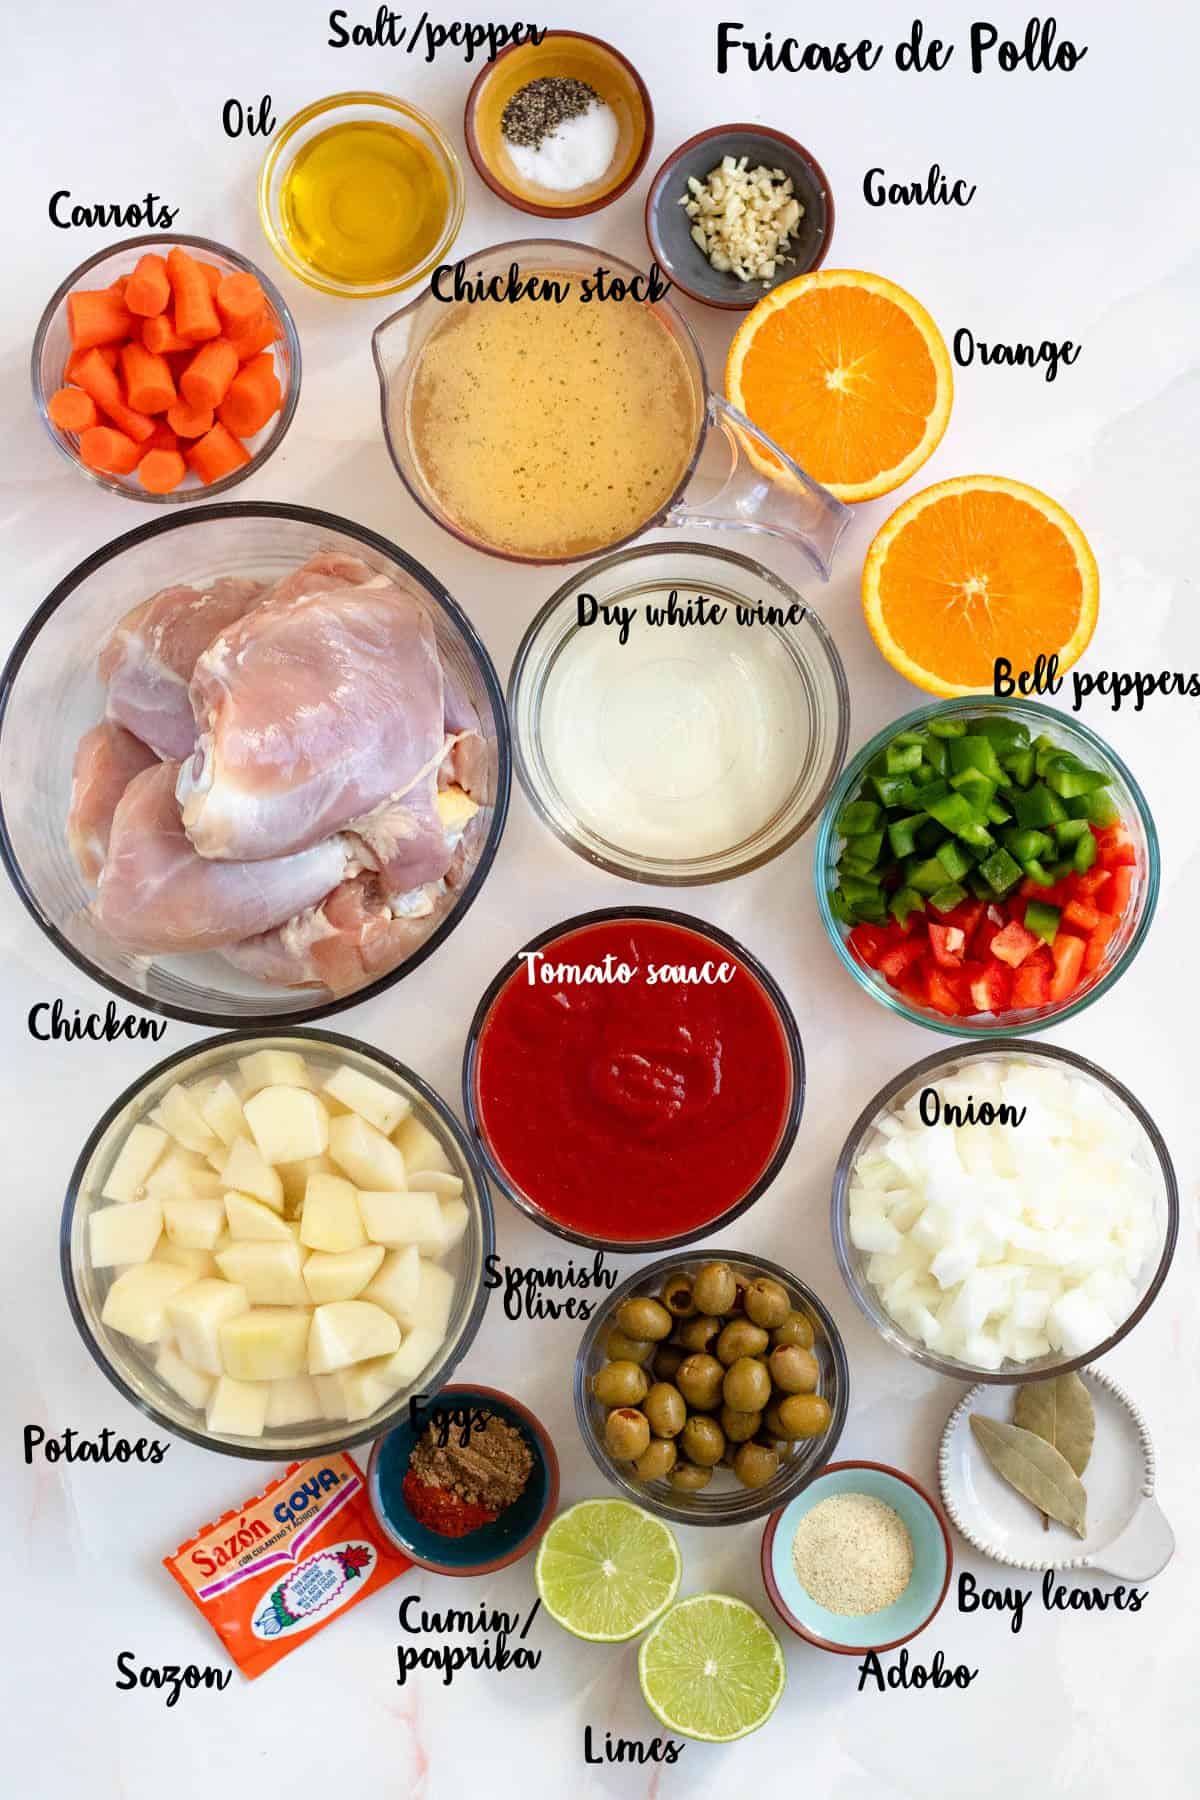 Ingredients shown are used to prepare fricase de pollo. 